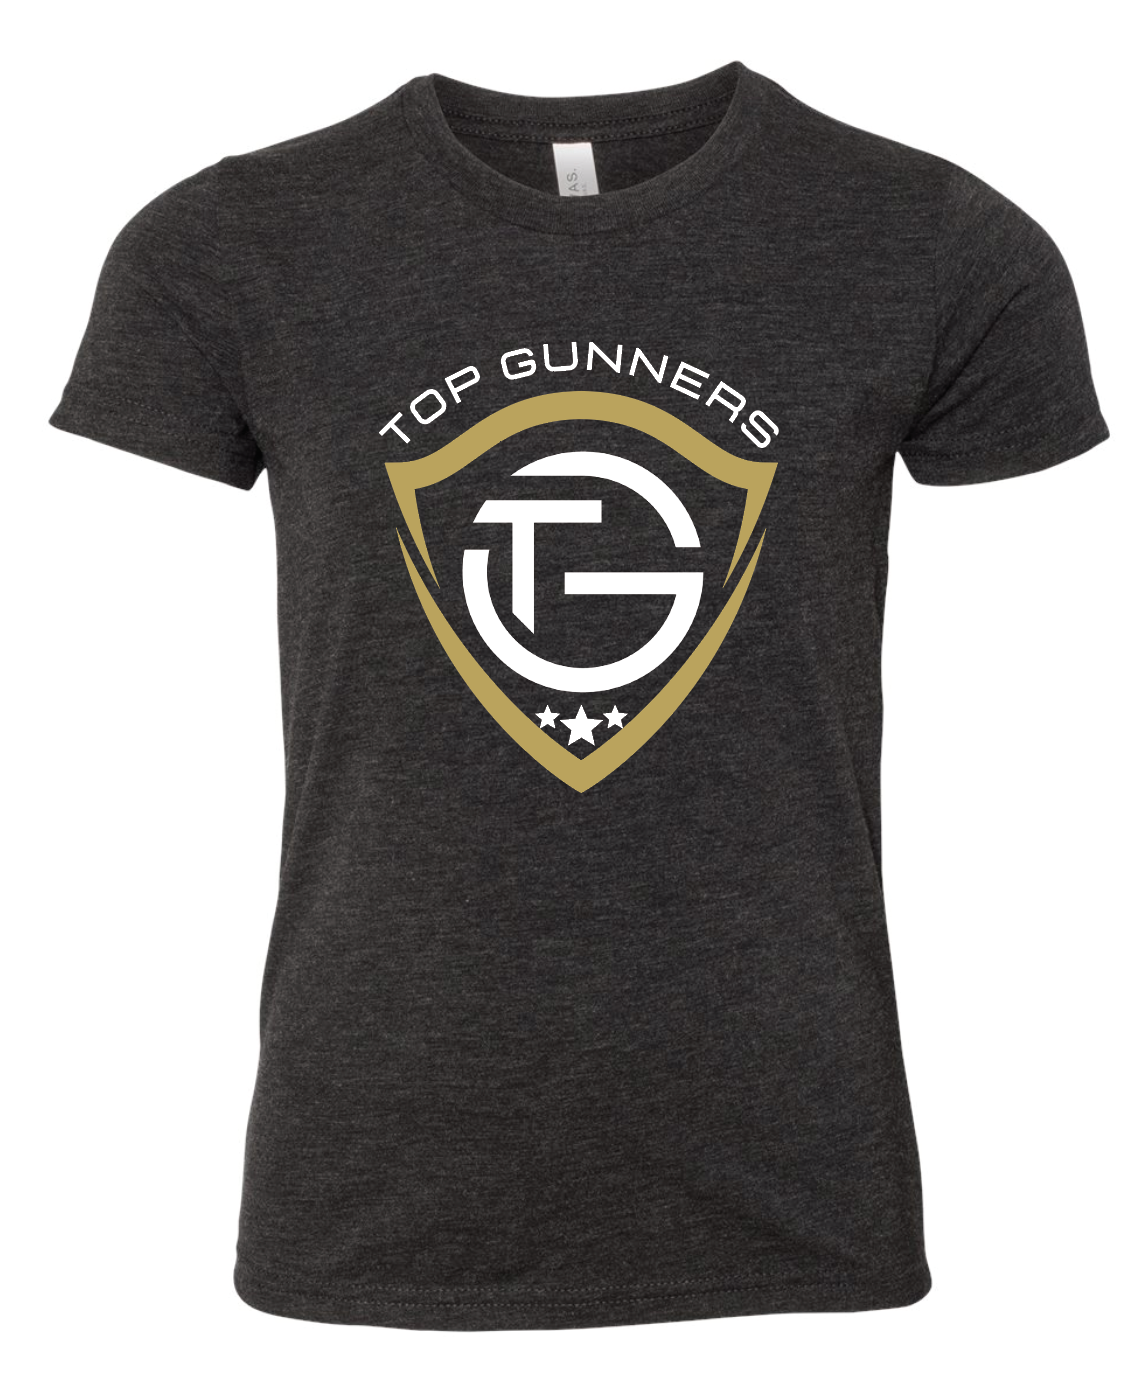 Top Gunners Youth Triblend Tee